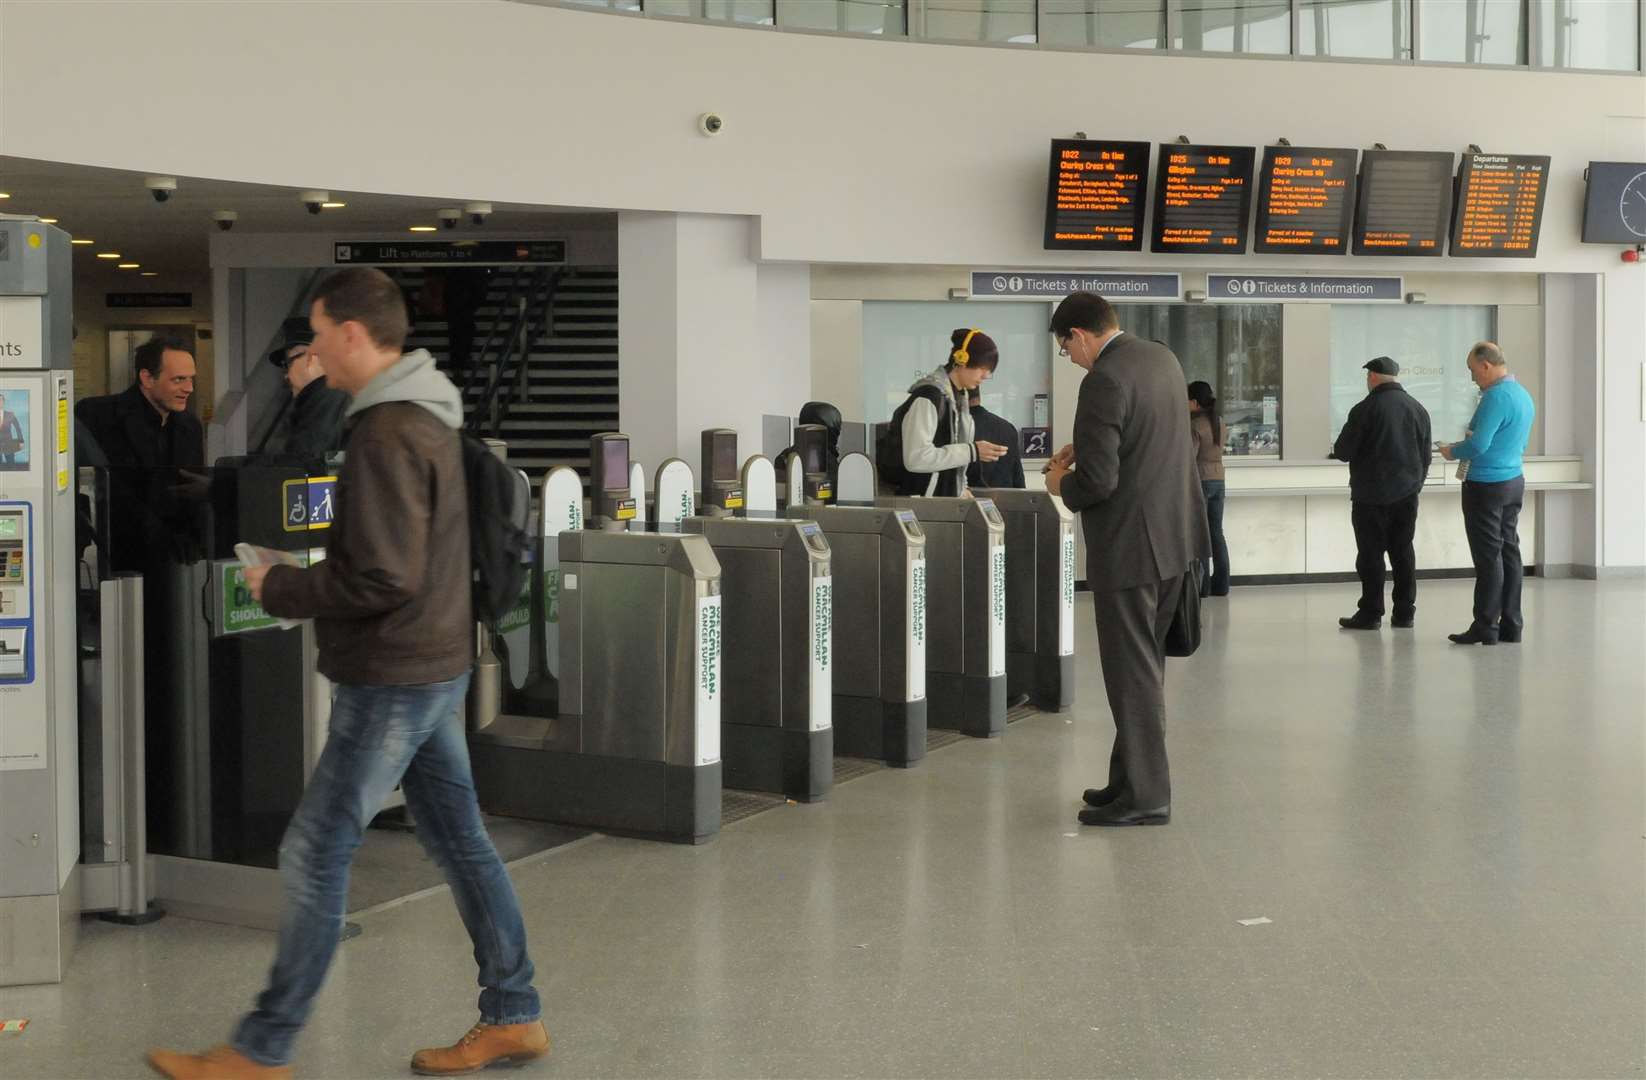 The price season rail tickets in Kent will rise by 2.8% next year